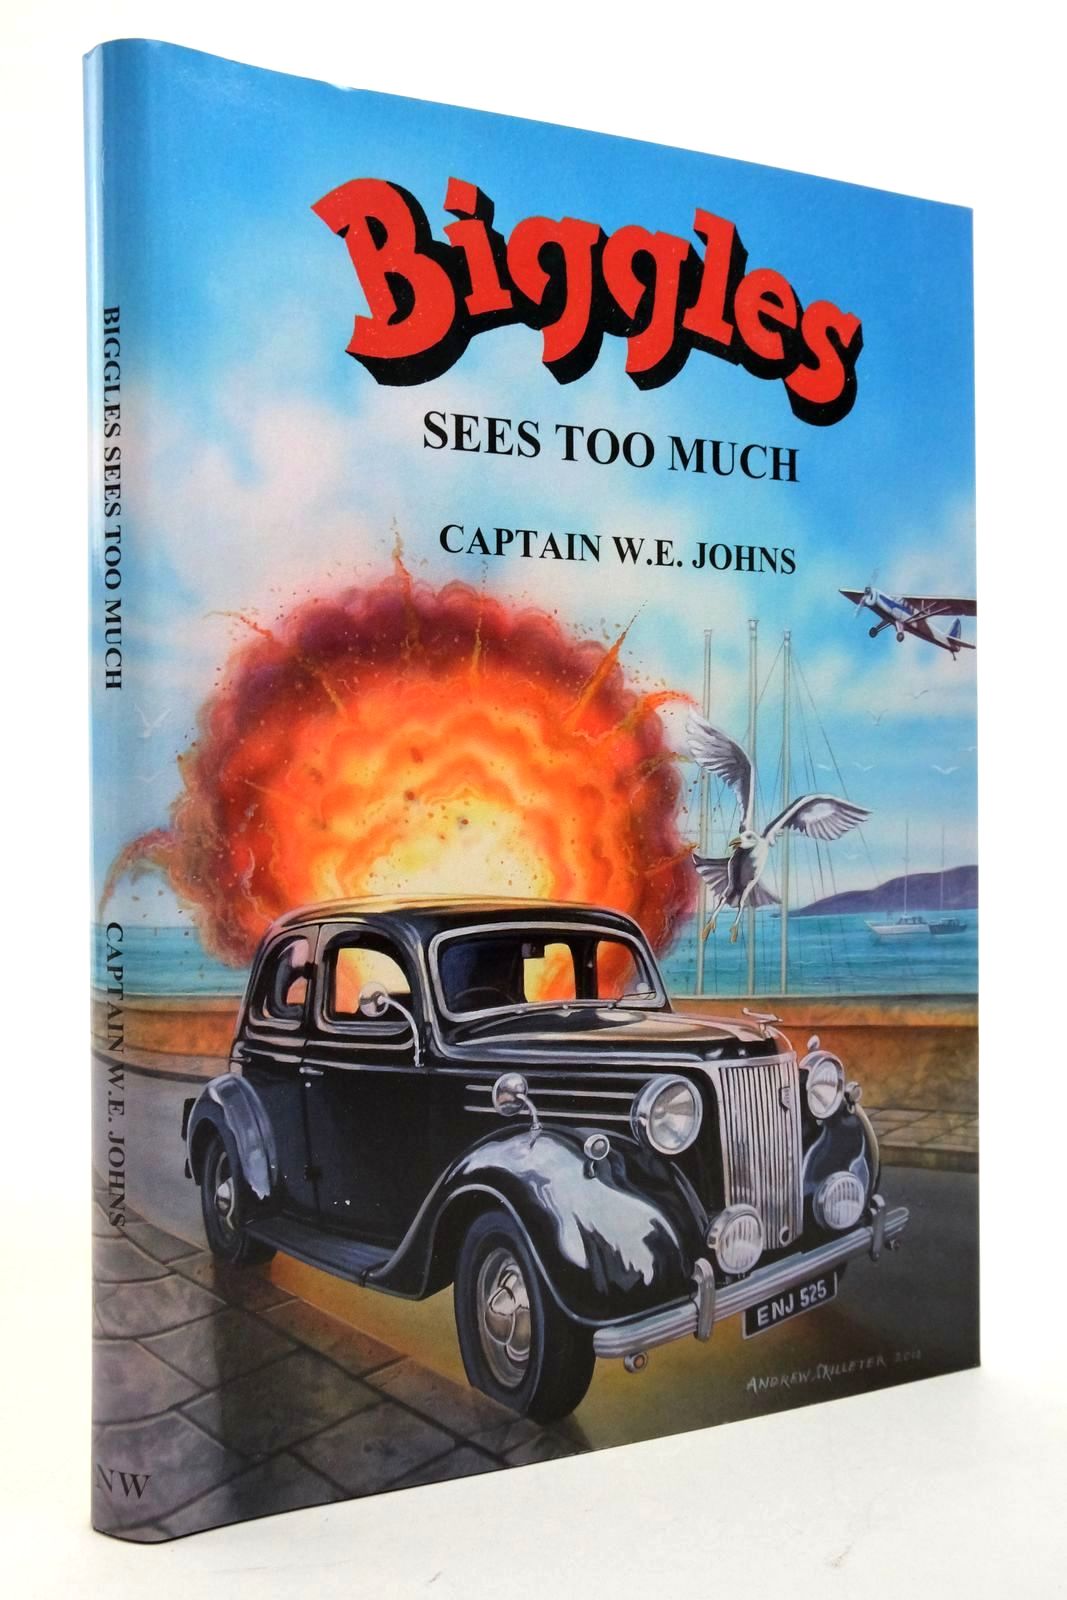 Photo of BIGGLES SEES TOO MUCH written by Johns, W.E. illustrated by Skilleter, Andrew published by Norman Wright (STOCK CODE: 2138313)  for sale by Stella & Rose's Books